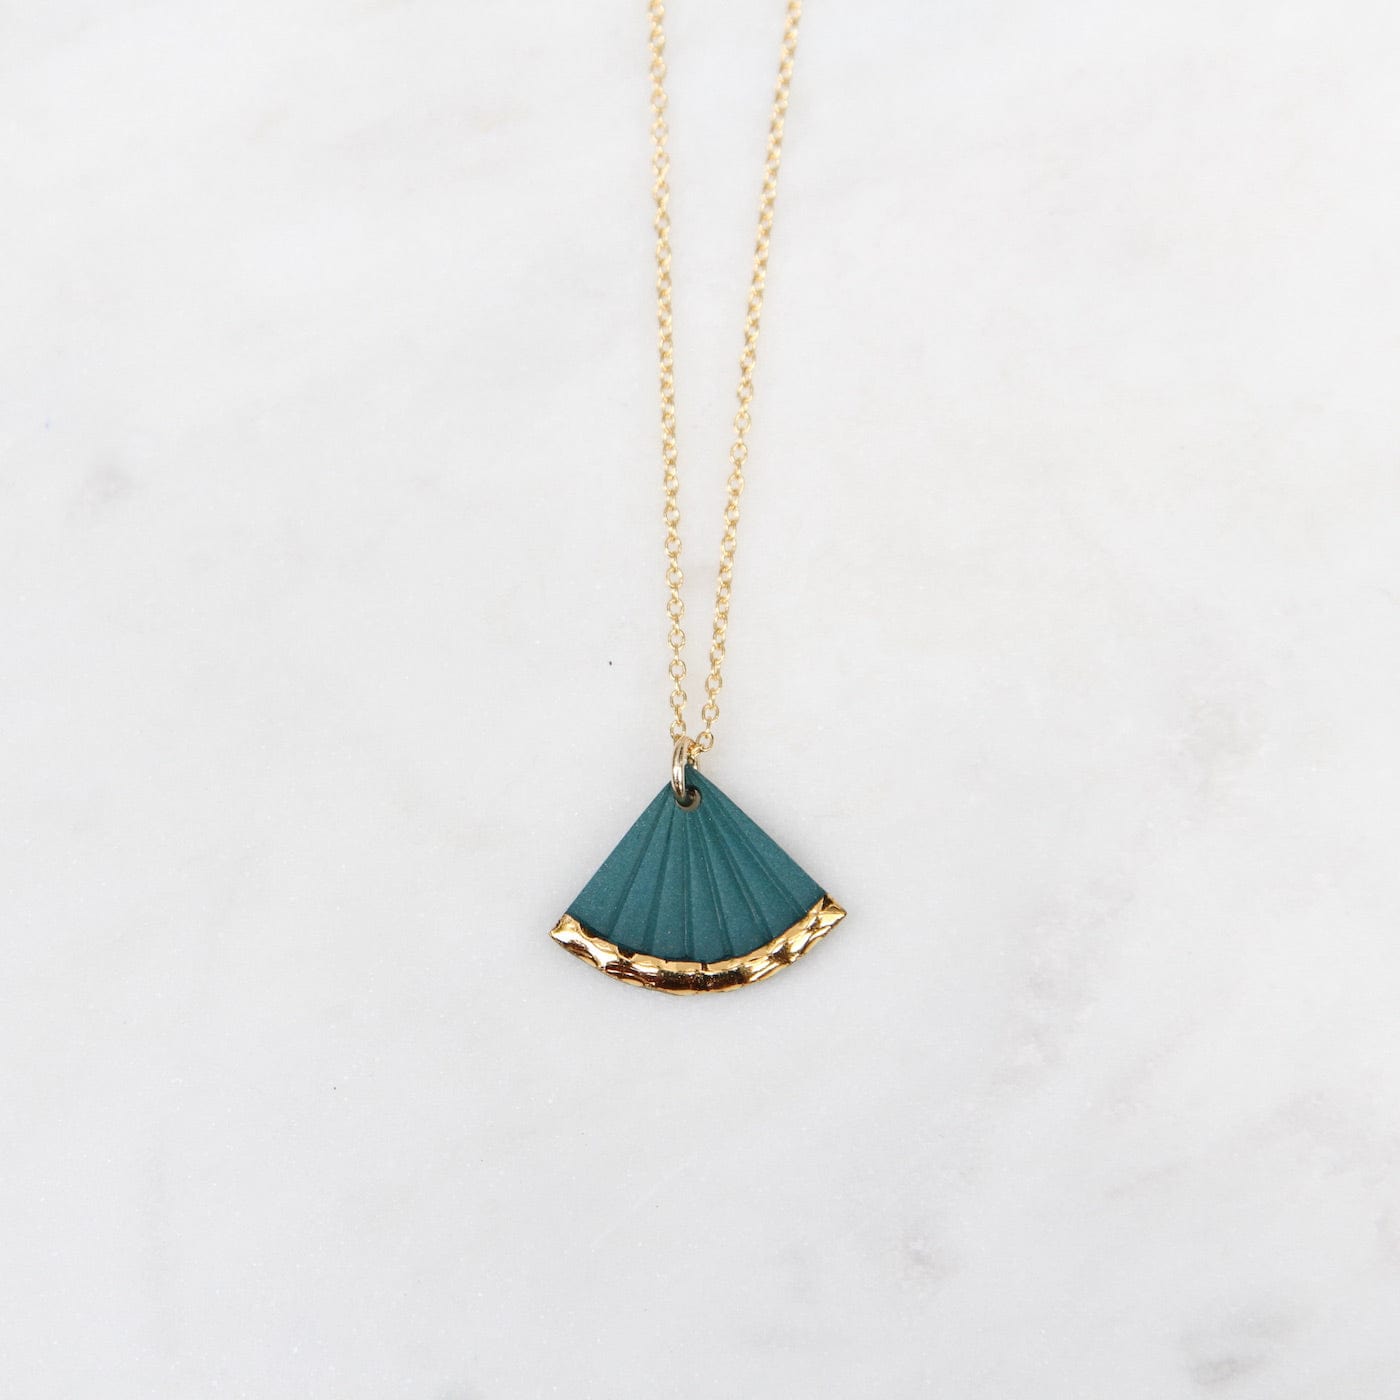 NKL-GF Gold Dipped Small Fan Necklace - Teal